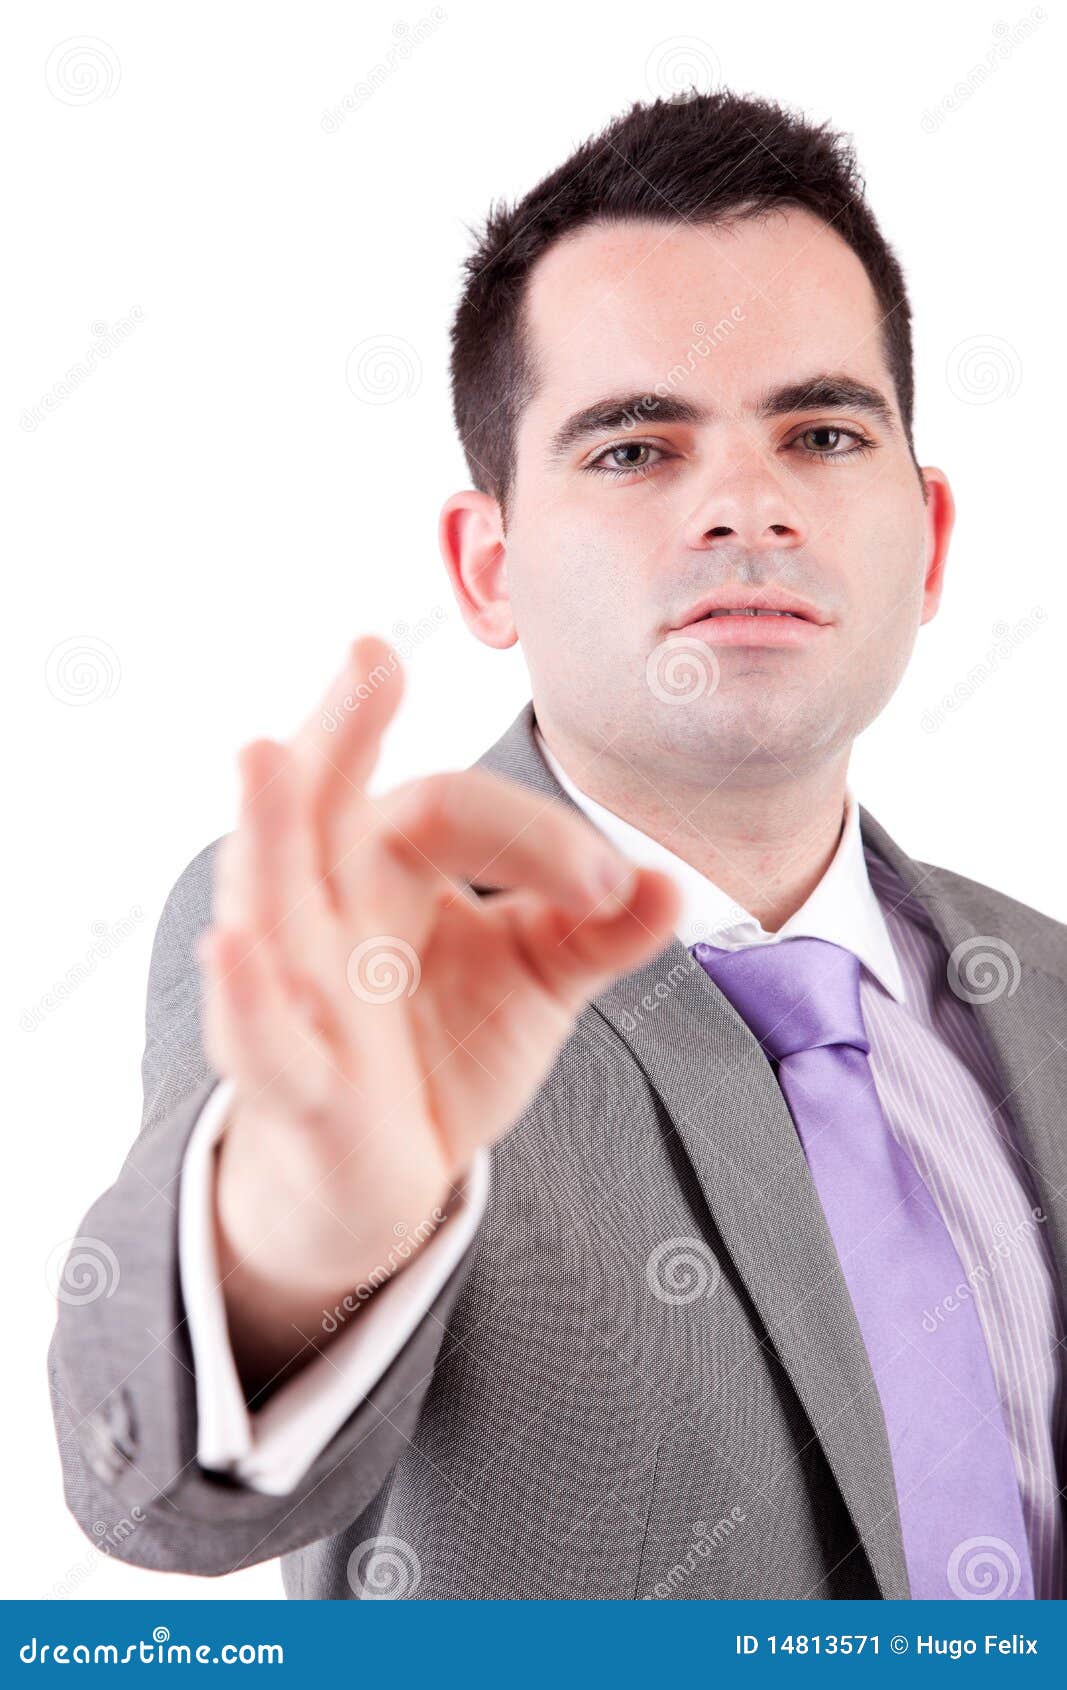 Business man signaling ok stock image. Image of person - 14813571